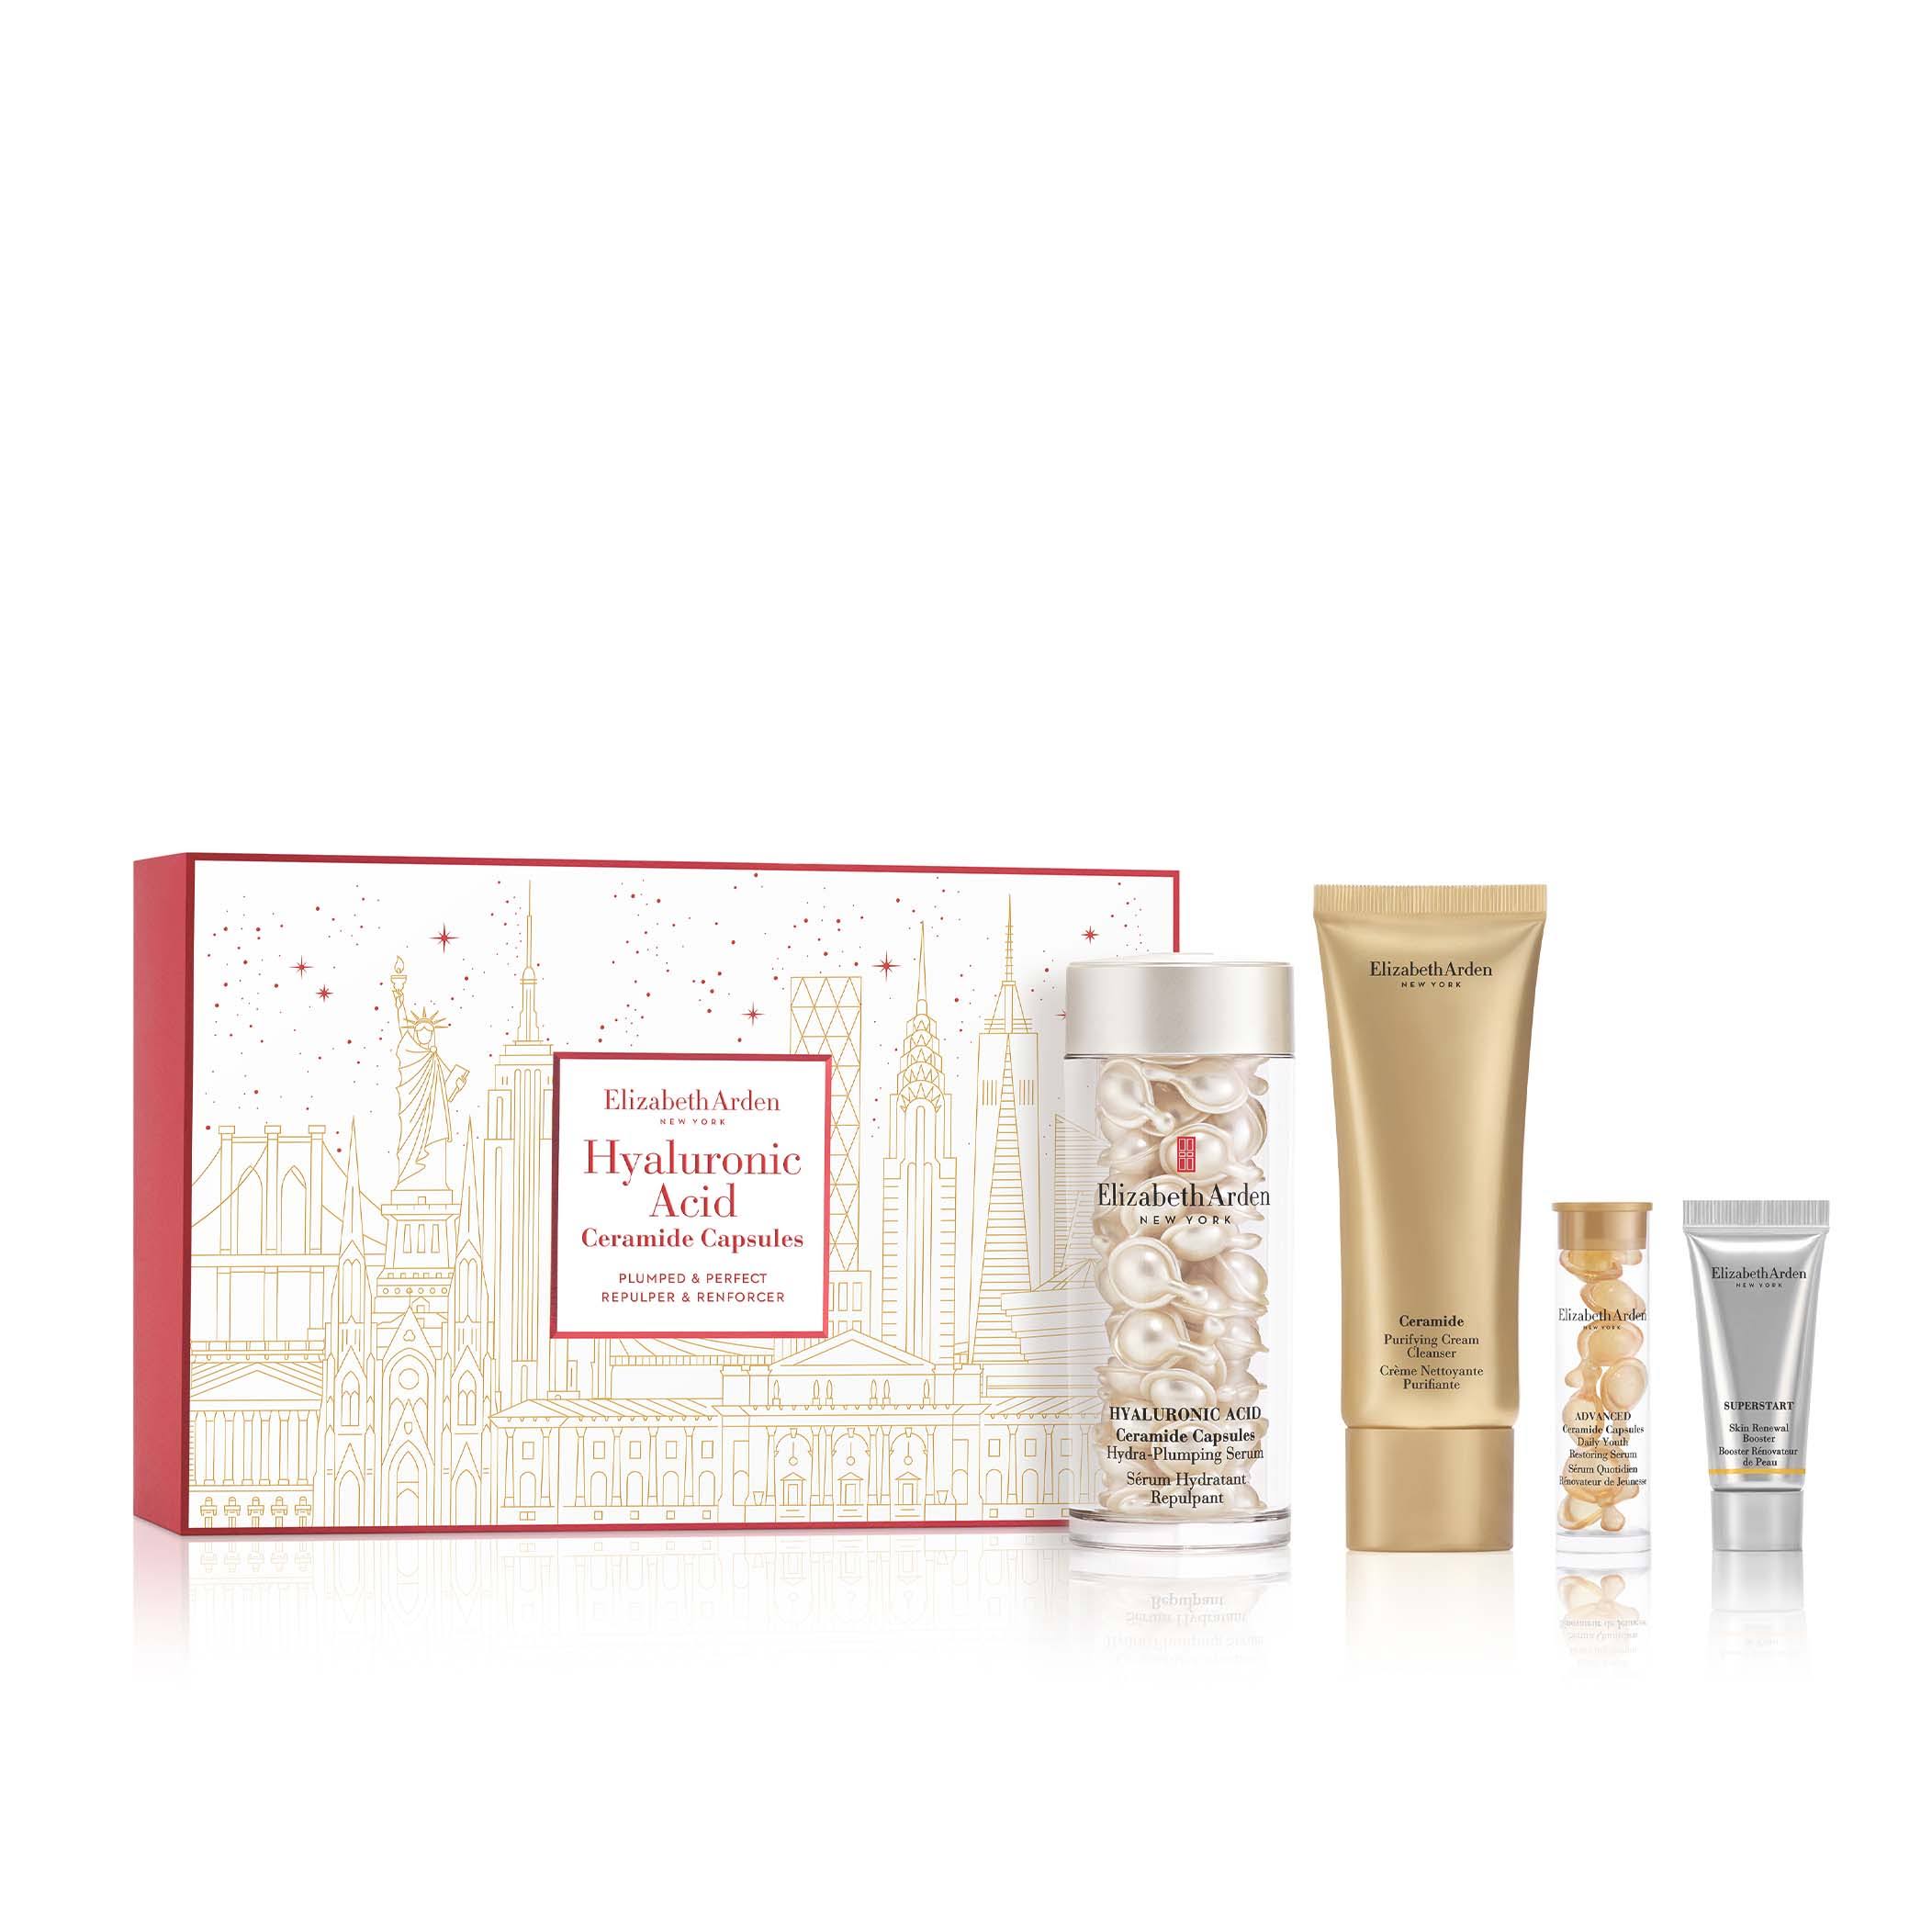 Elizabeth Arden Plumped and Perfect 60-Piece Hyaluronic Acid Ceramide Capsules Skincare Gift Set